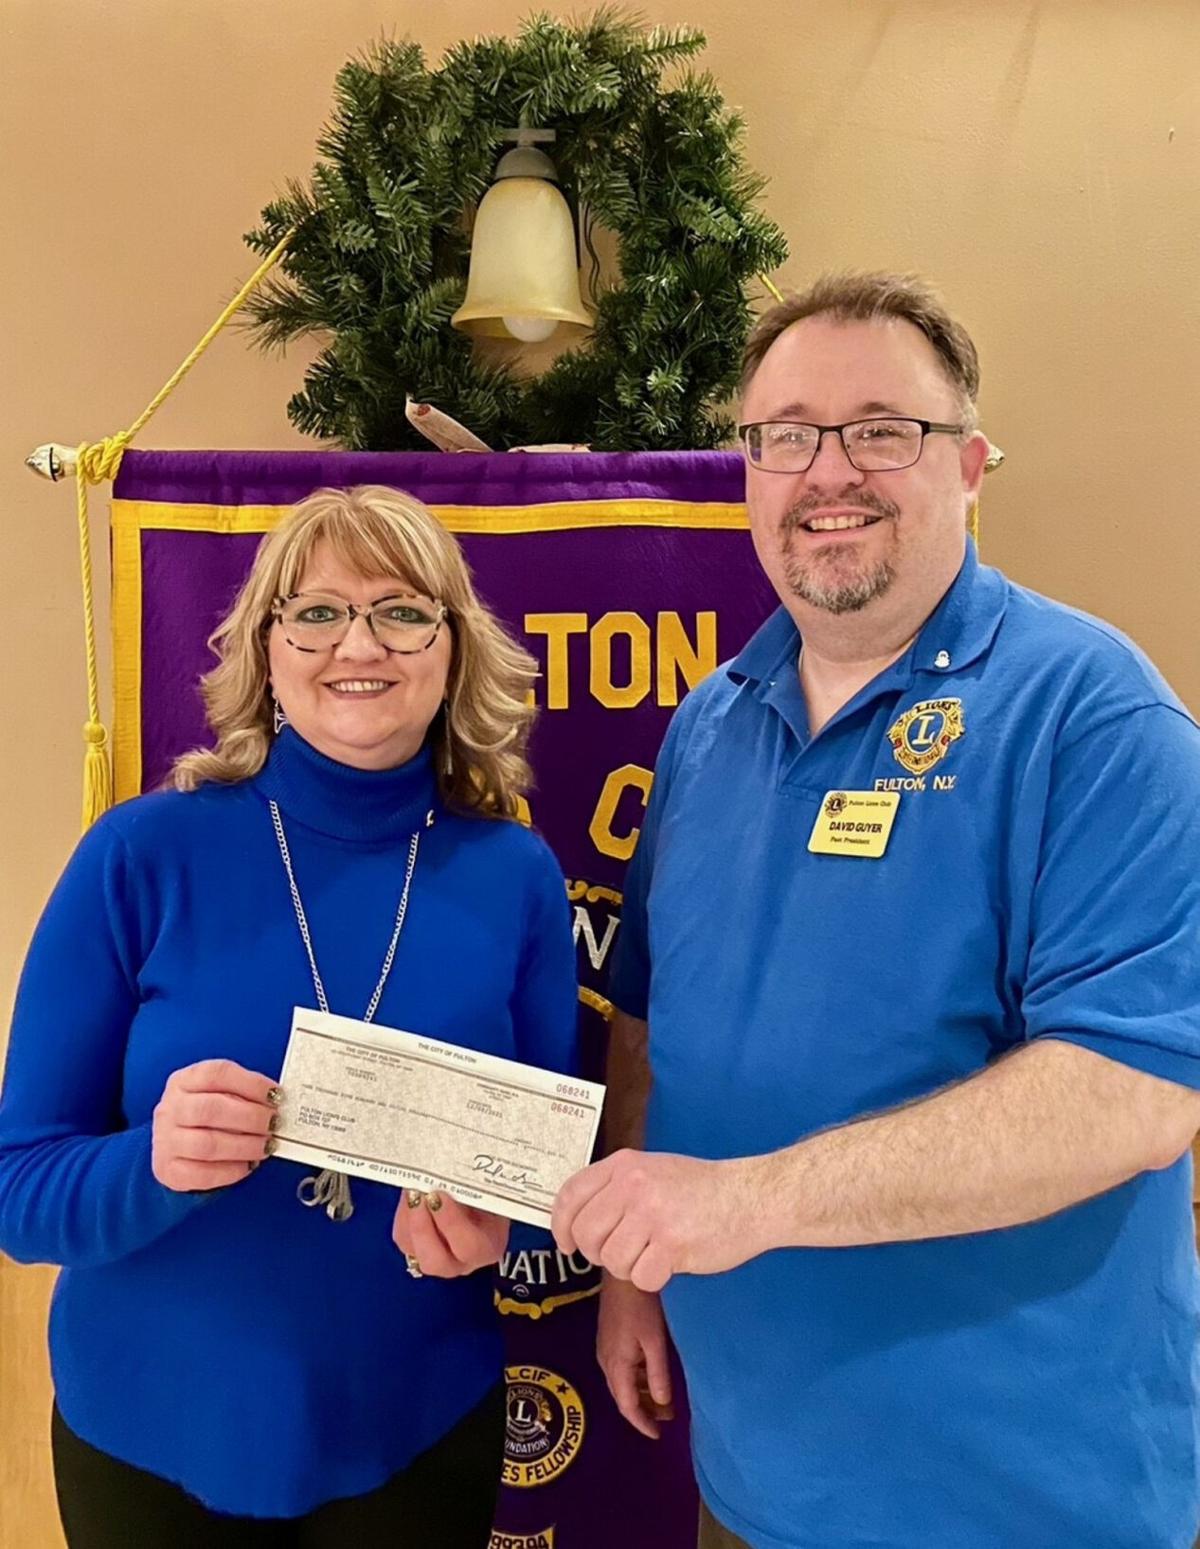 Fulton Lions Club inducts Morrison, receives $1,500 grant from city of Fulton